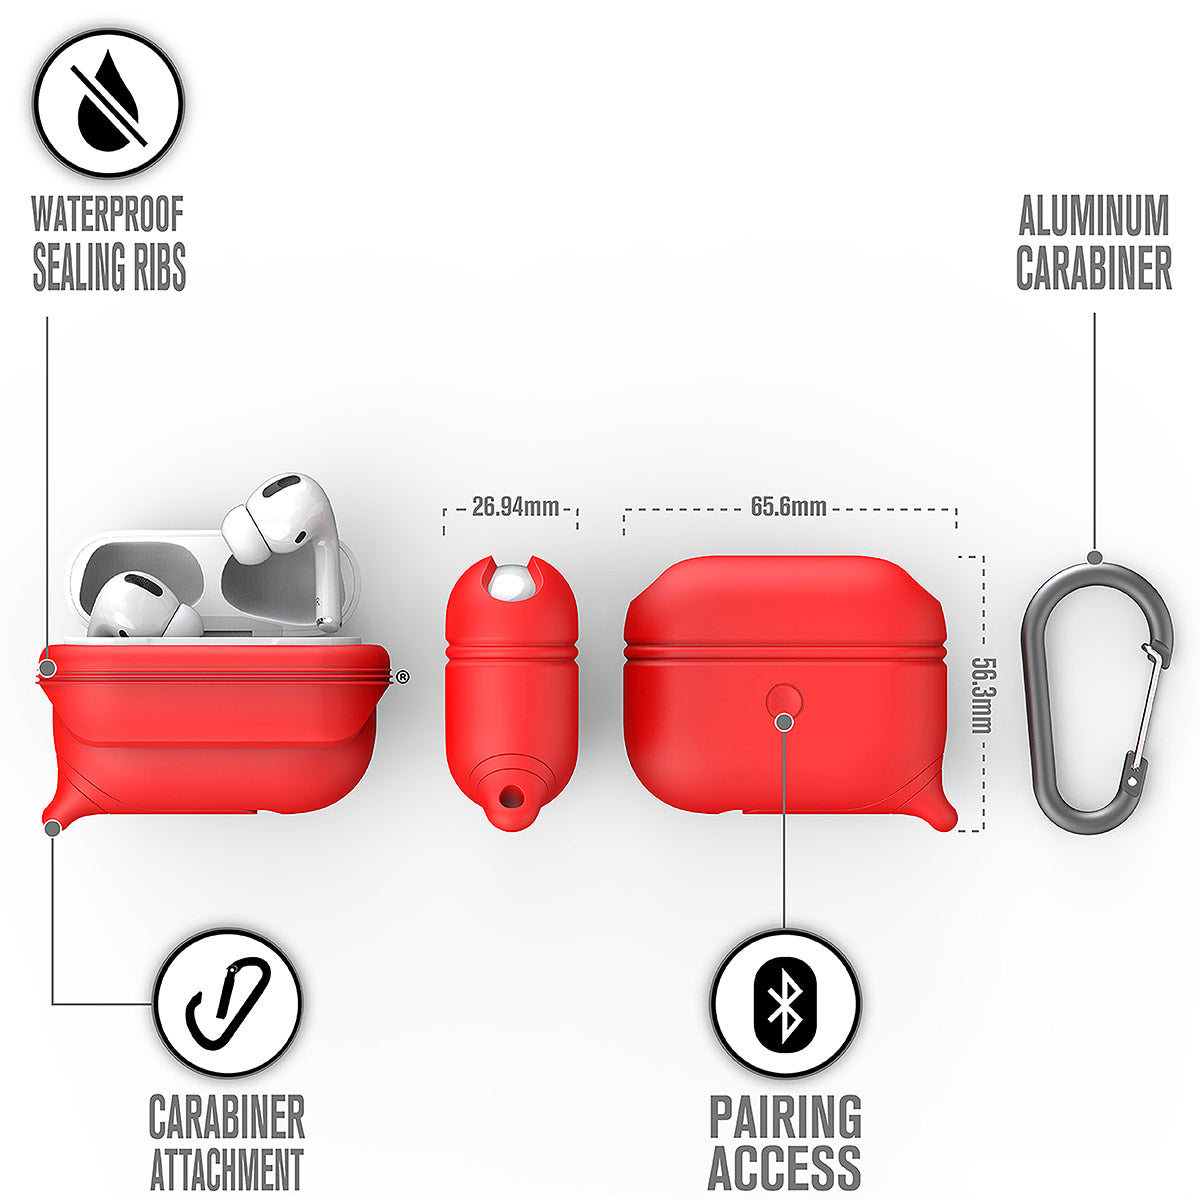 catalyst airpods pro gen 2 1 waterproof case carabiner special edition red different views showing the sealing ribs carabiner attachment loop and pairing access text reads waterproof sealing ribs aluminum carabiner carabiner attachment pairing access